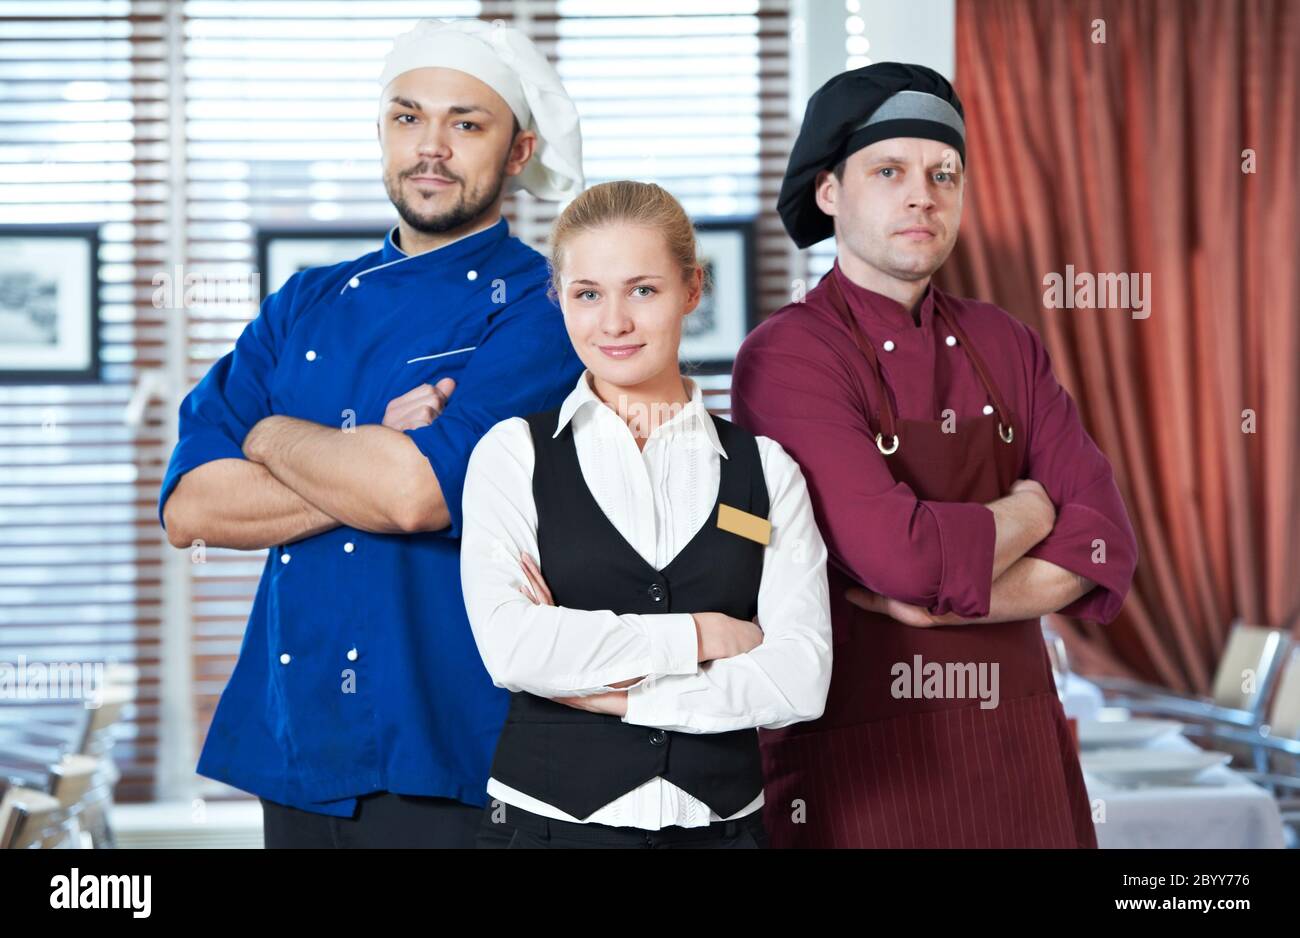 restaurant administrator and chefs Stock Photo